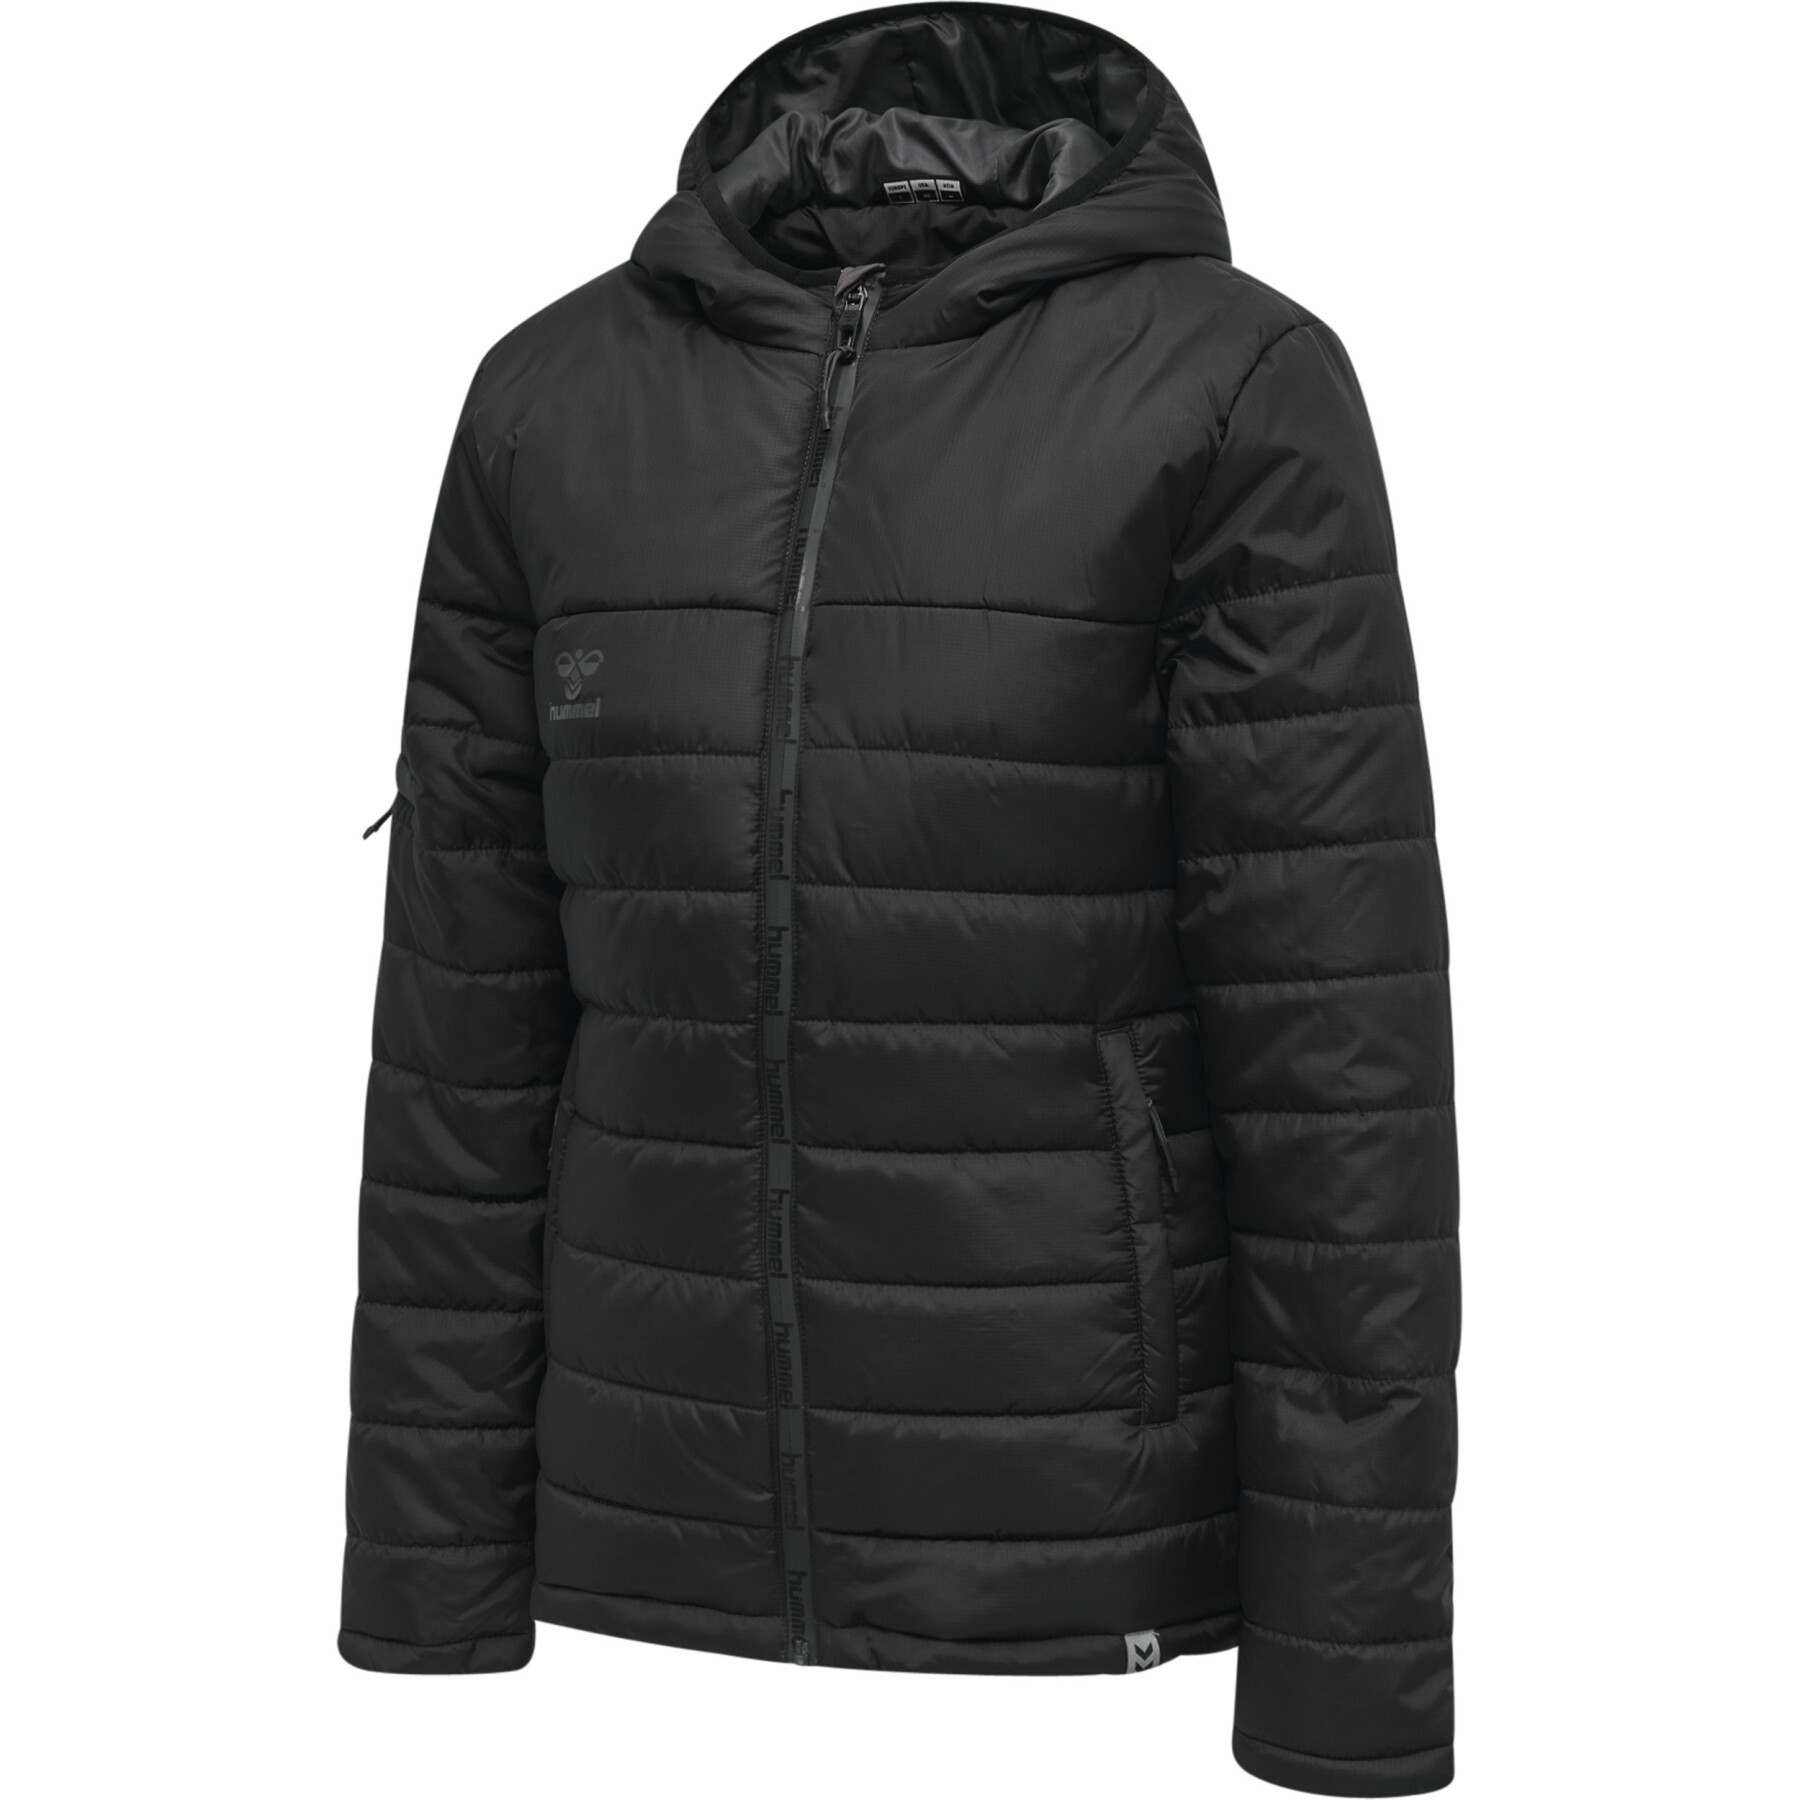 Casaco de mulher Hummel Quilted North